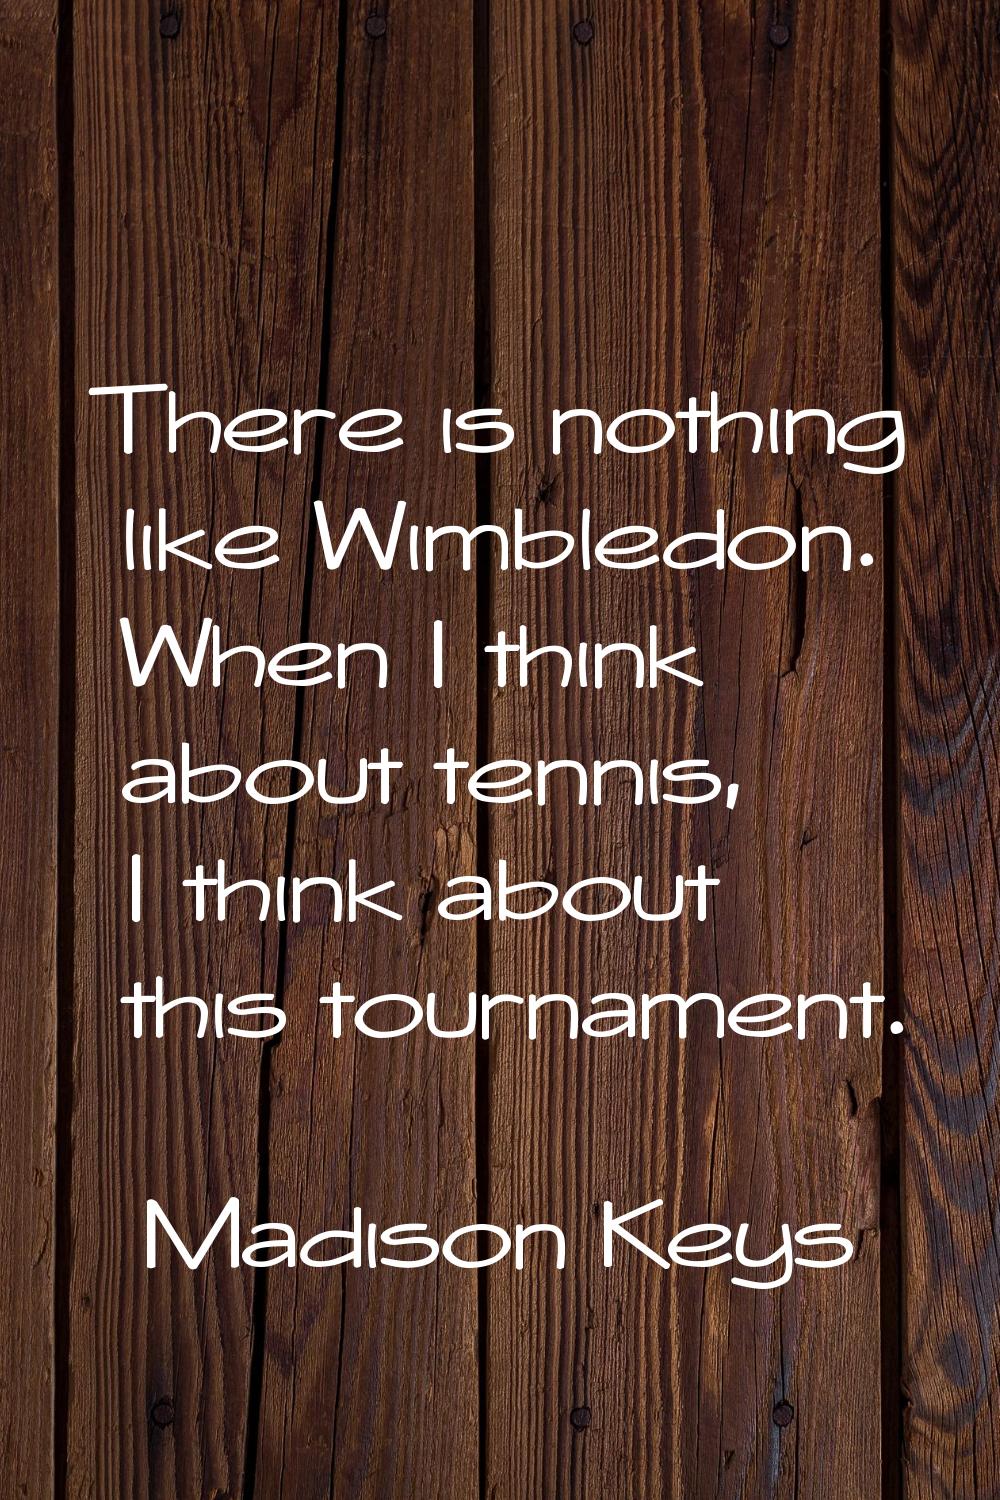 There is nothing like Wimbledon. When I think about tennis, I think about this tournament.